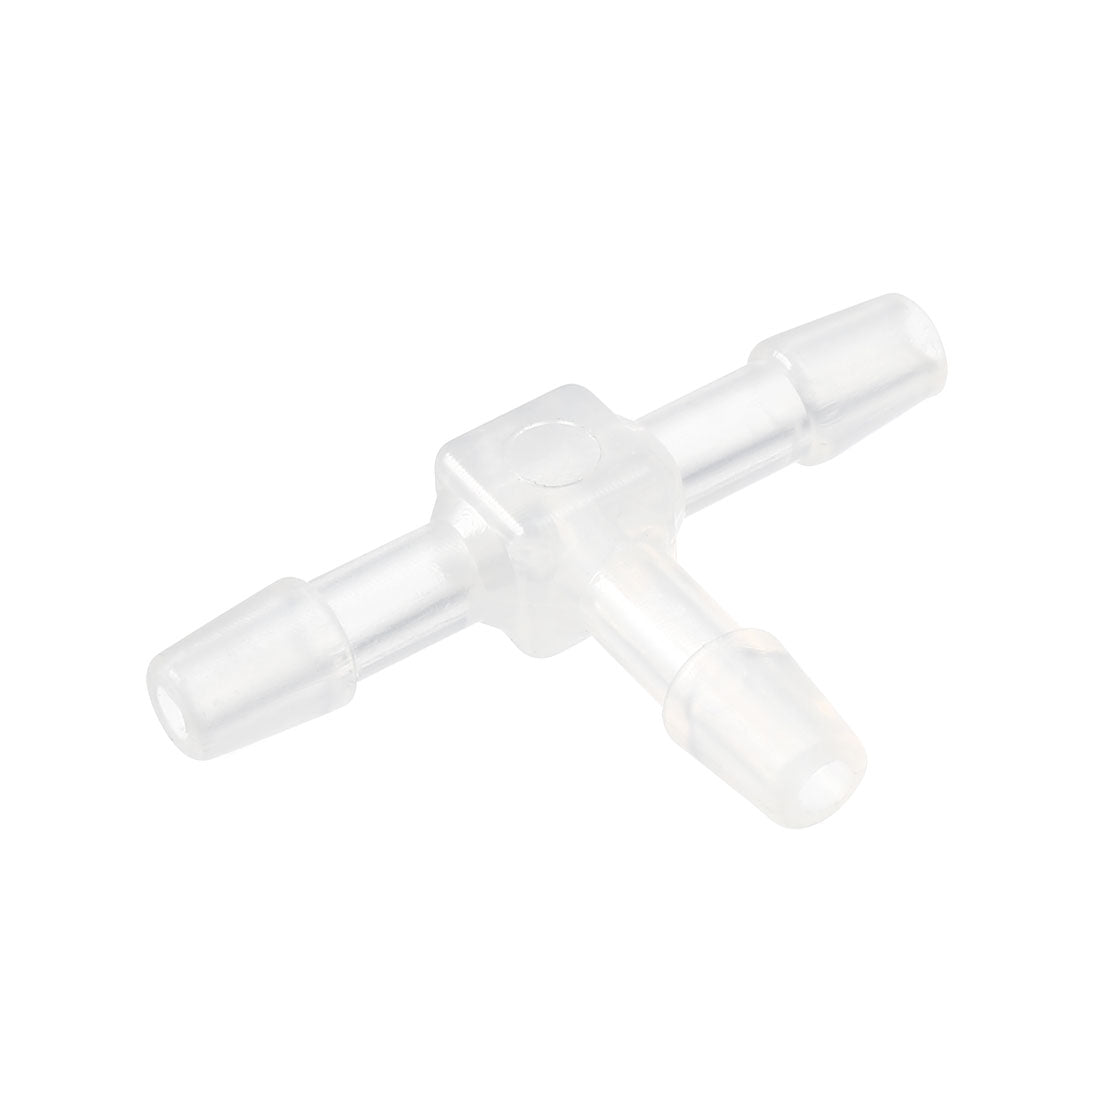 uxcell Uxcell 3-Way T Shape Air Valve Connector Plastic Inline Tubing Connectors for 4mm Airline Tube